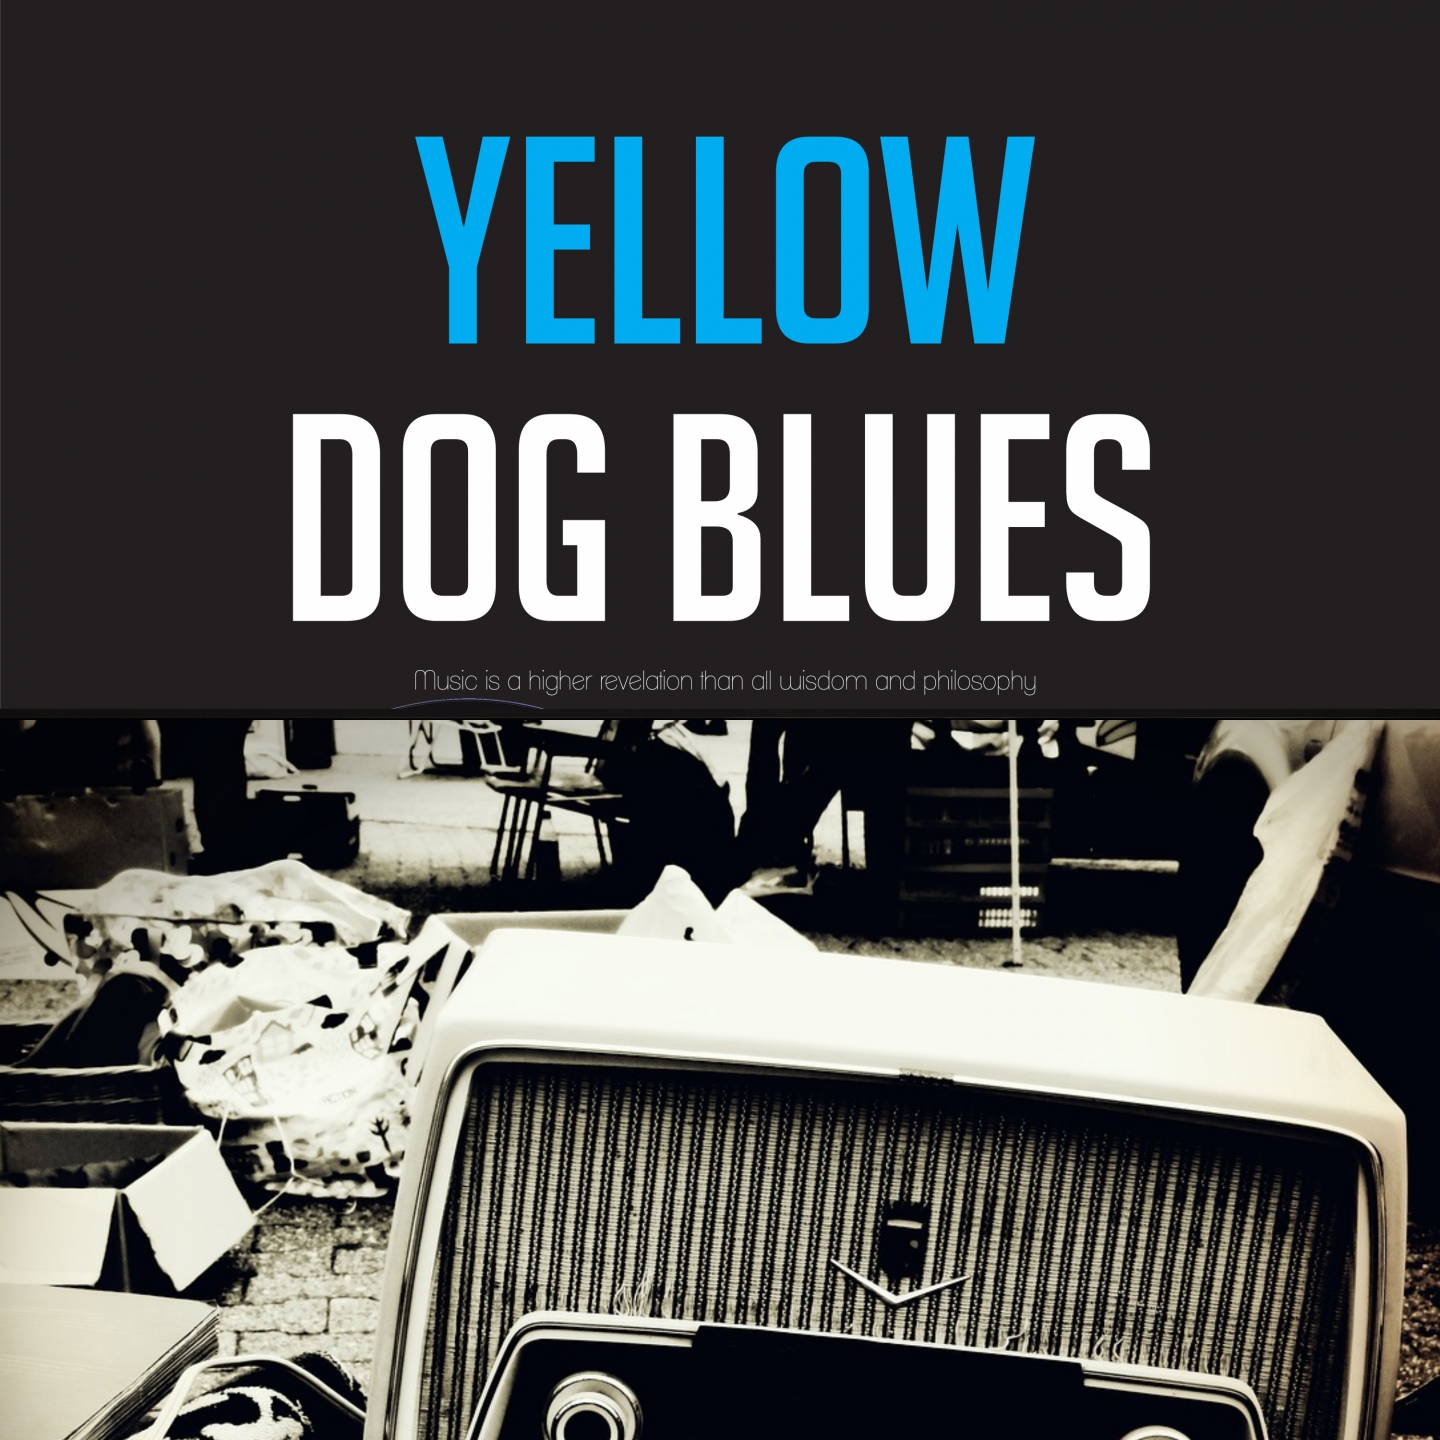 The Yellow Dog Blues